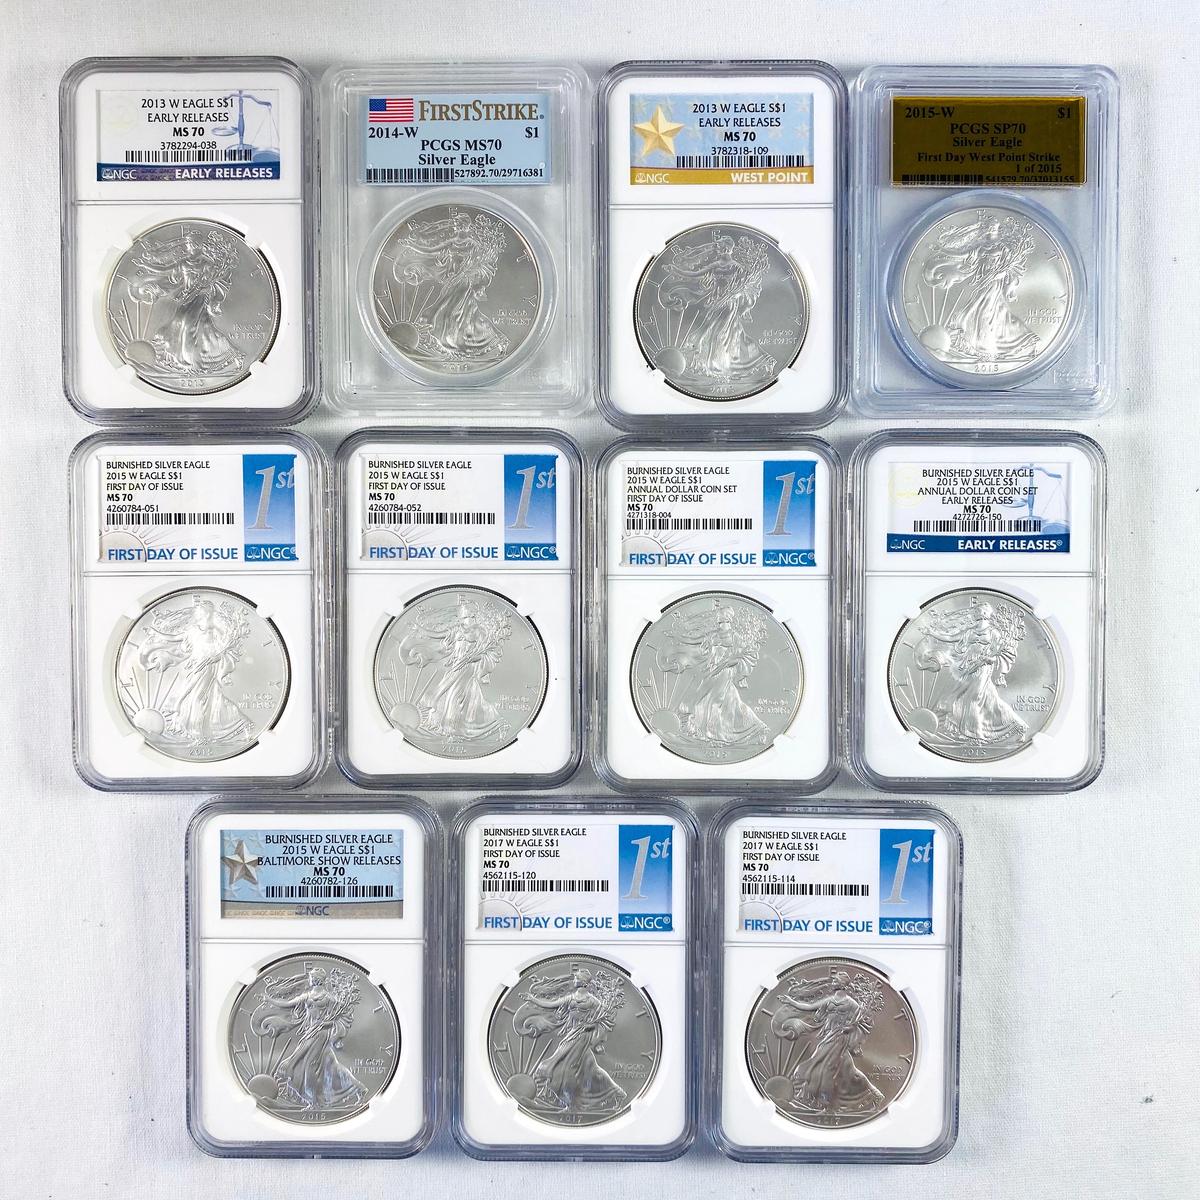 Lot of 11 certified mixed date 2013-W to 2017-W burnished U.S. American Eagle silver dollars